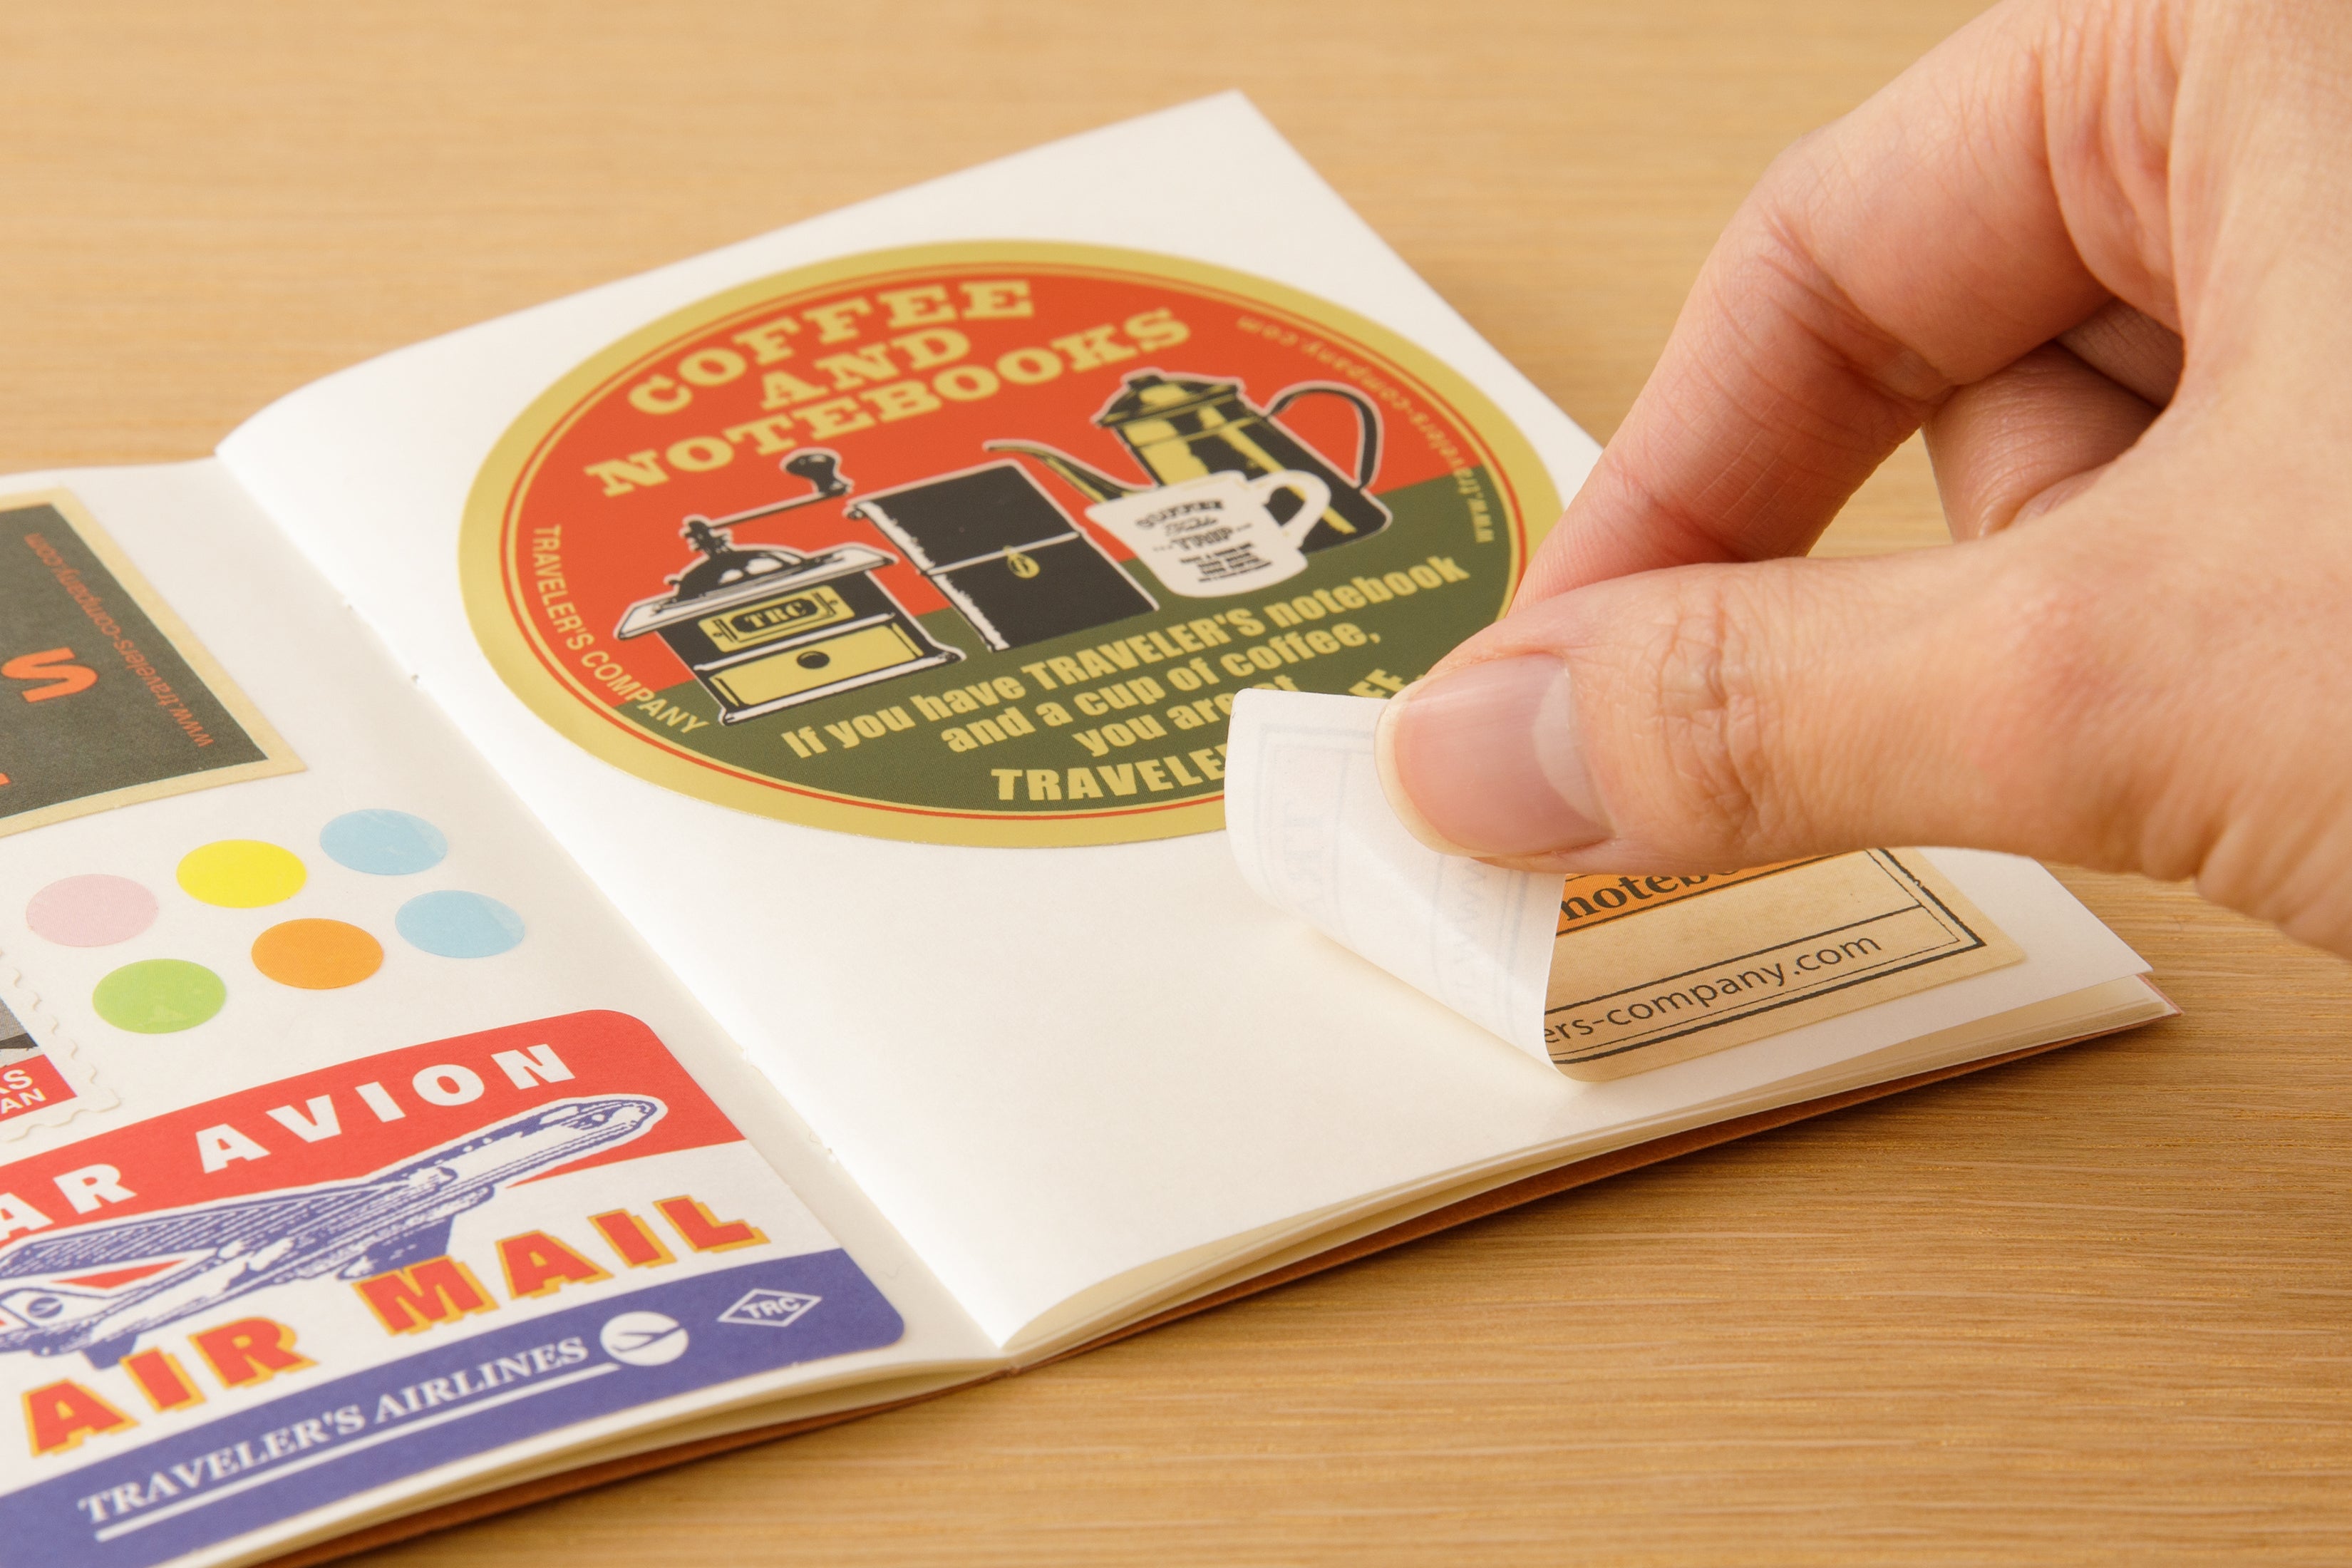 The notebook is crafted from the same smooth backing paper that is left after removing a sticker. 